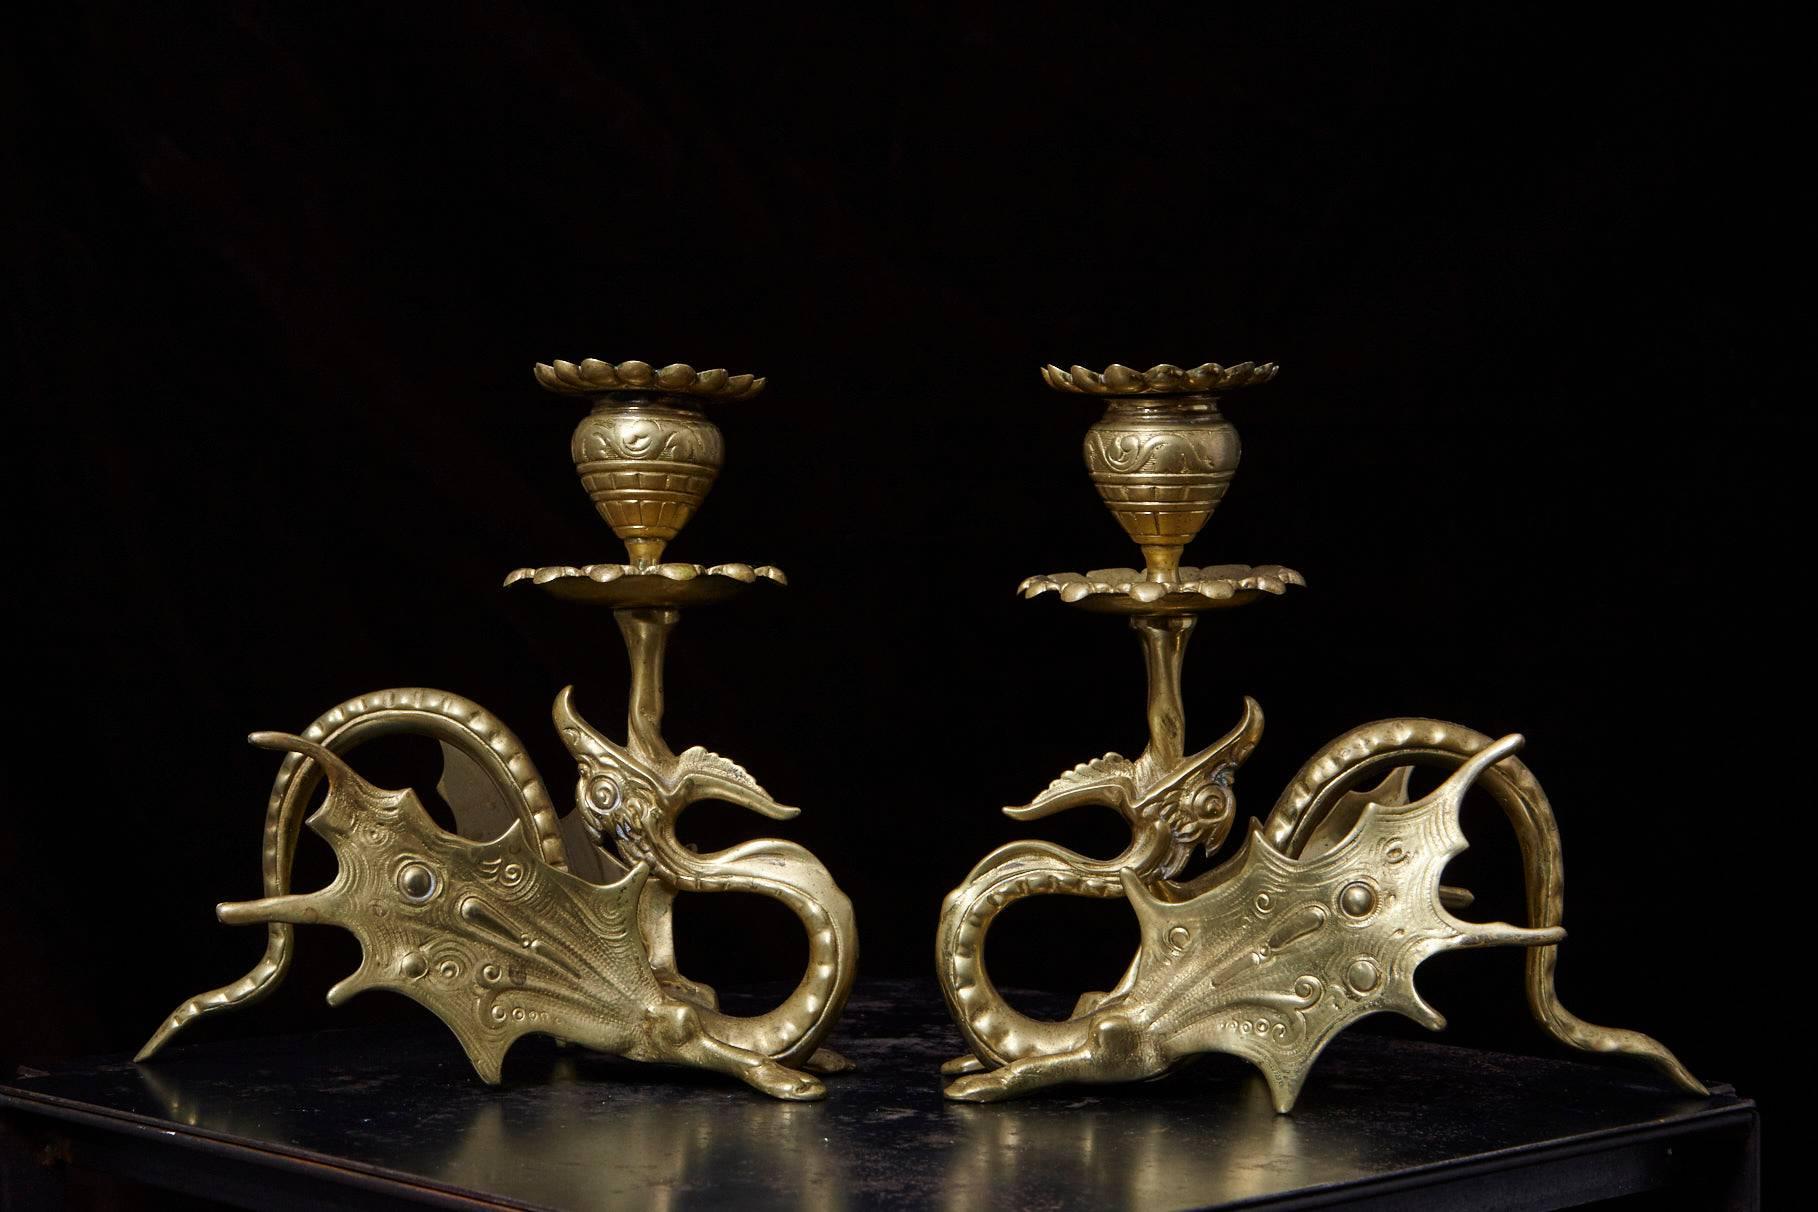 Lovely pair of Victorian winged dragon solid brass candleholders, with removable candle cup tops. Age appropriate patina.